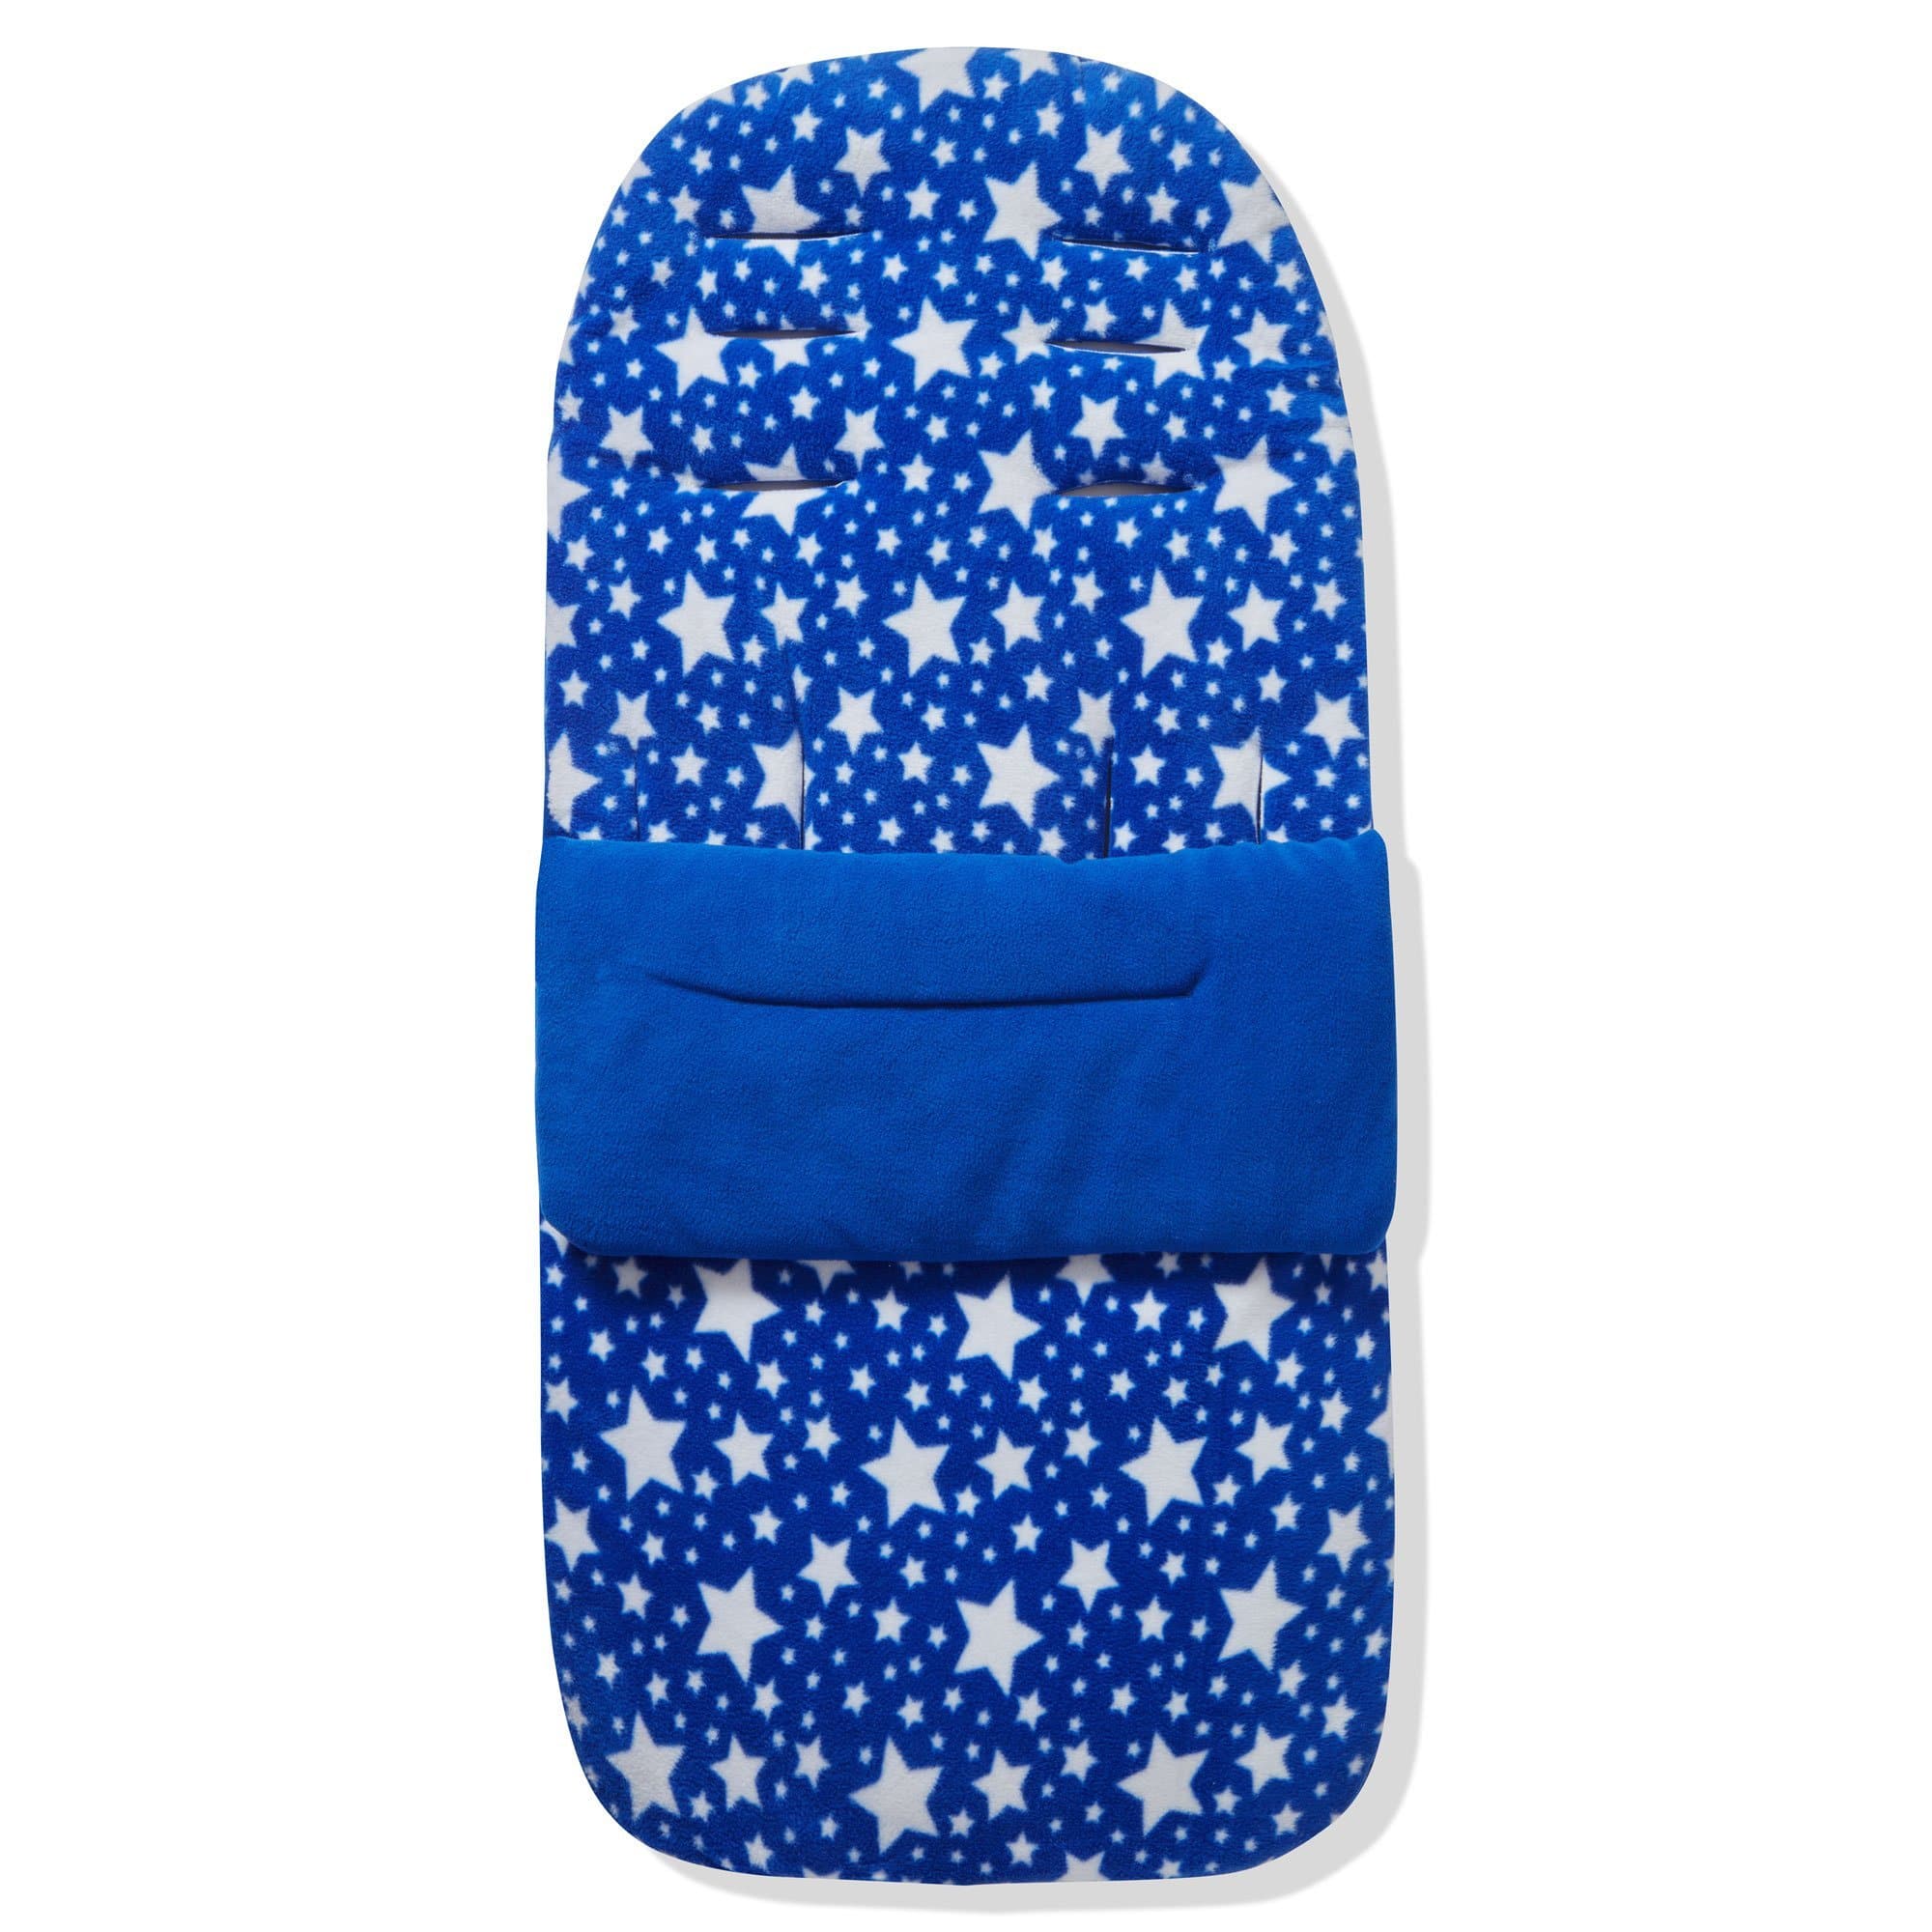 Fleece Footmuff / Cosy Toes Compatible with Mee-Go - Blue Star / Fits All Models | For Your Little One